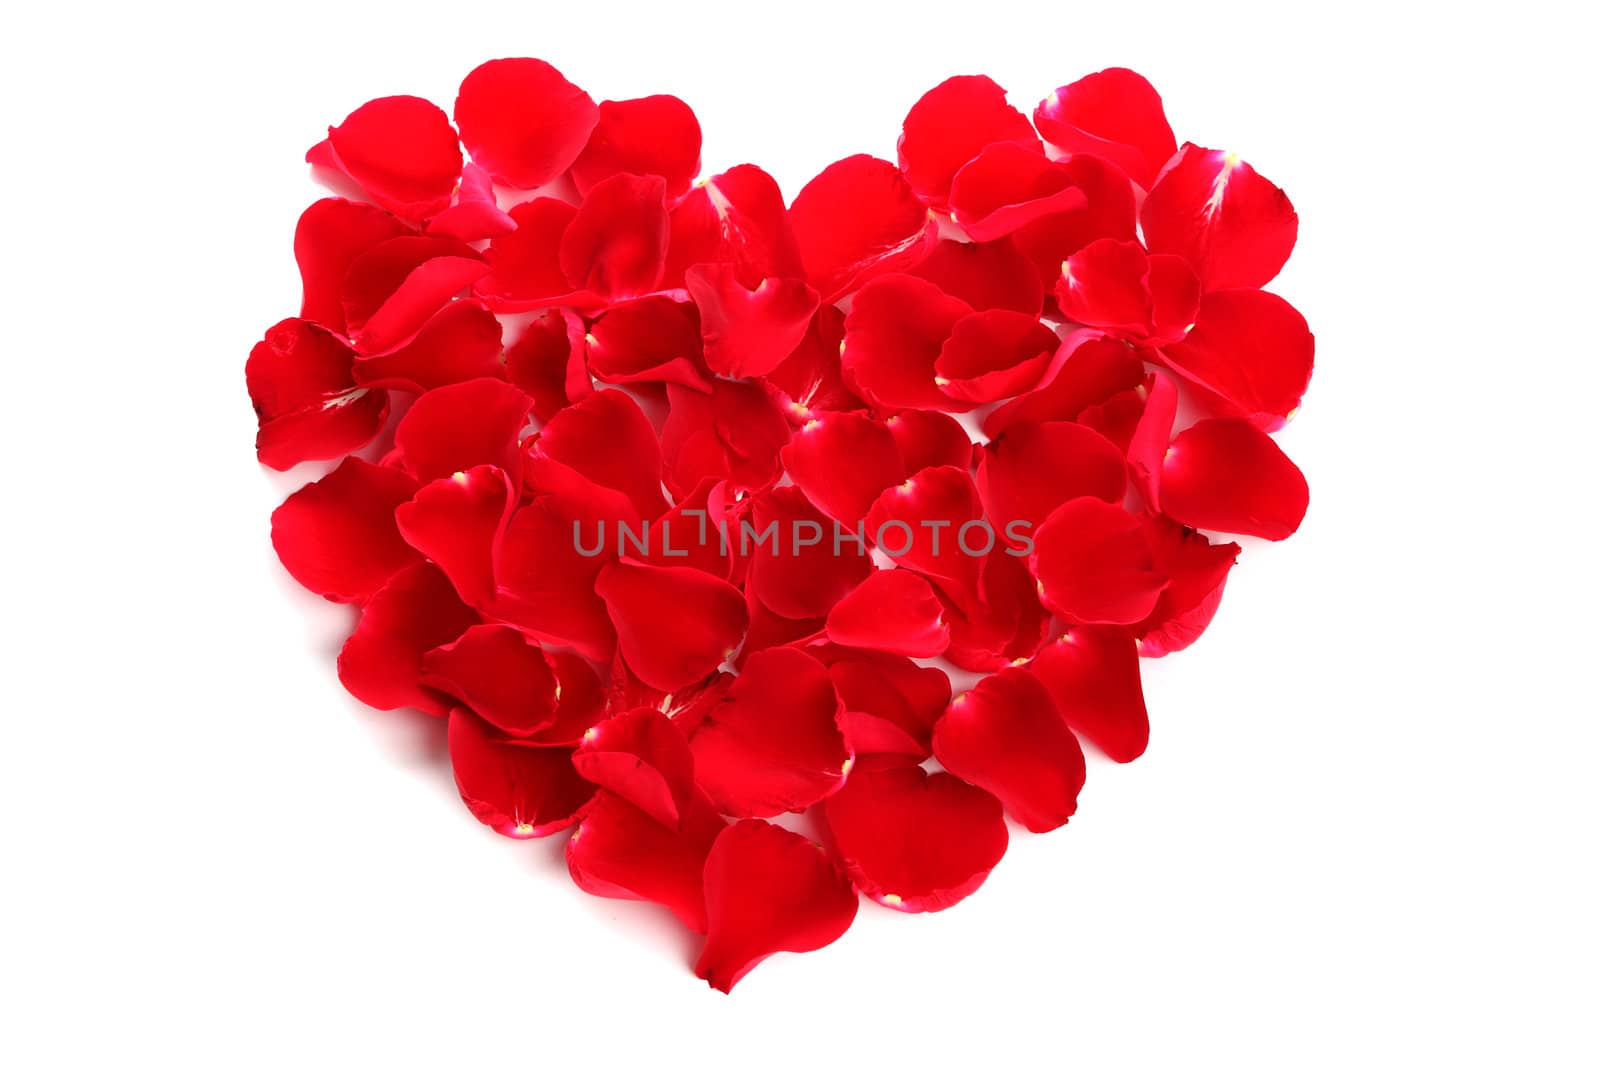 Beautiful heart of red rose petals by posterize